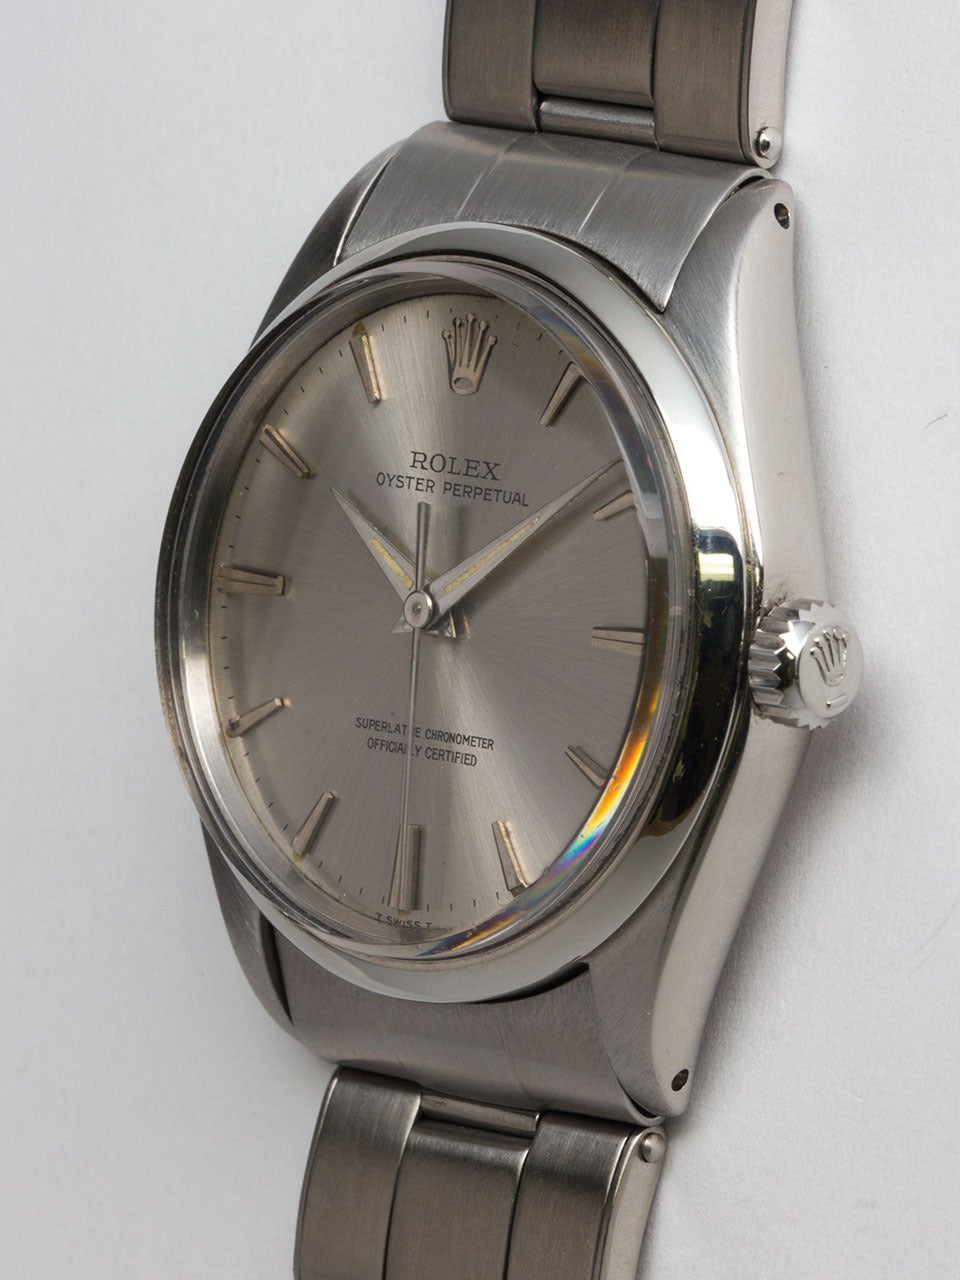 1965 rolex oyster perpetual